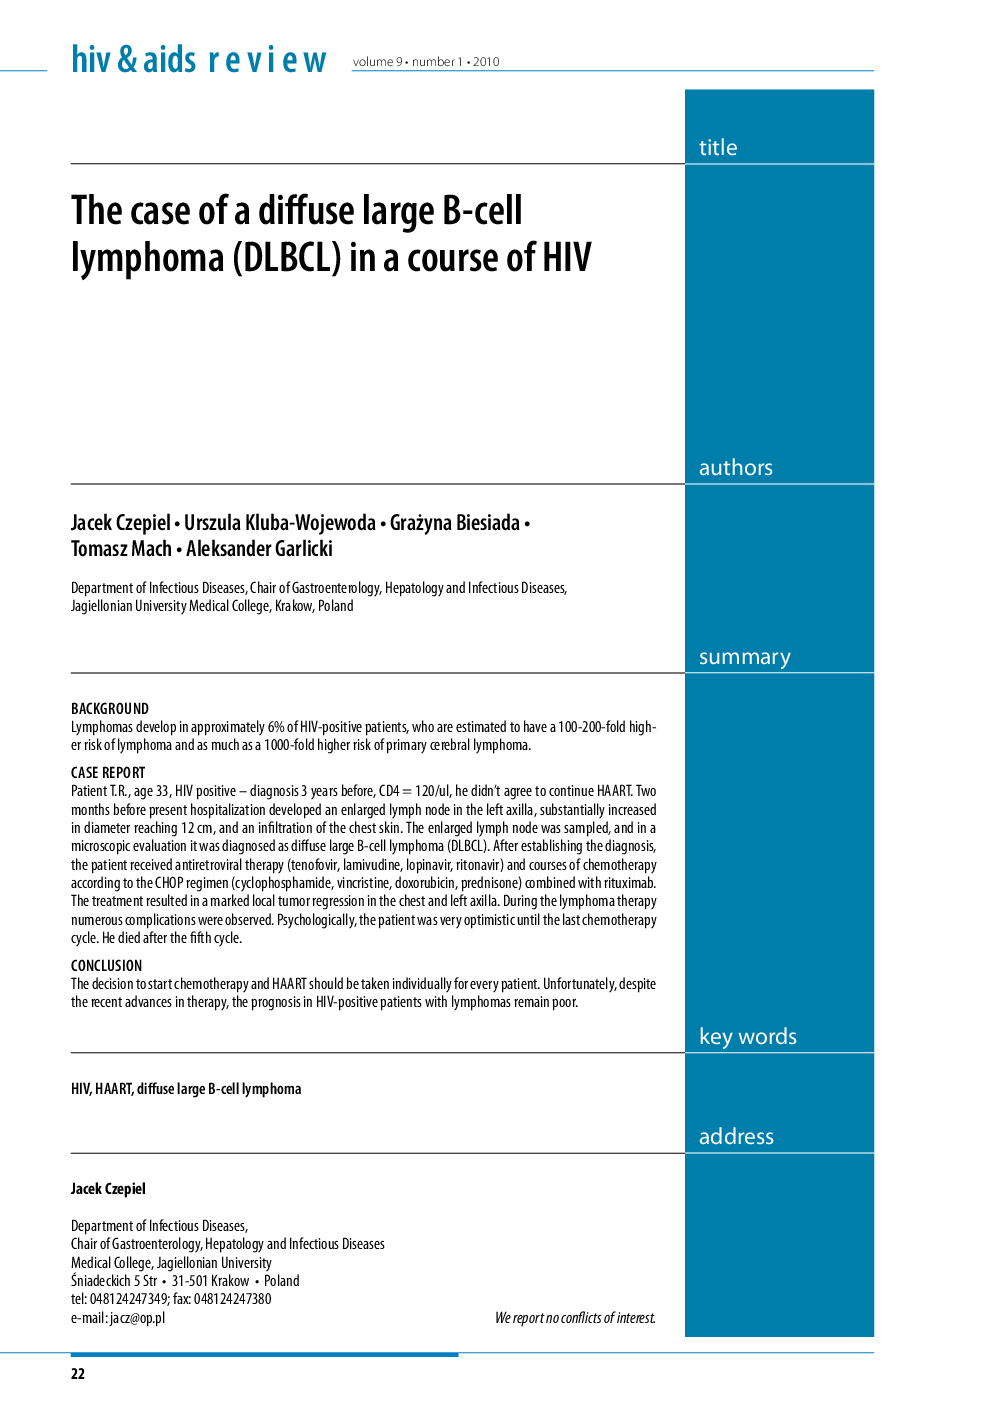 The case of a diffuse large B-cell lymphoma (DLBCL) in a course of HIV 